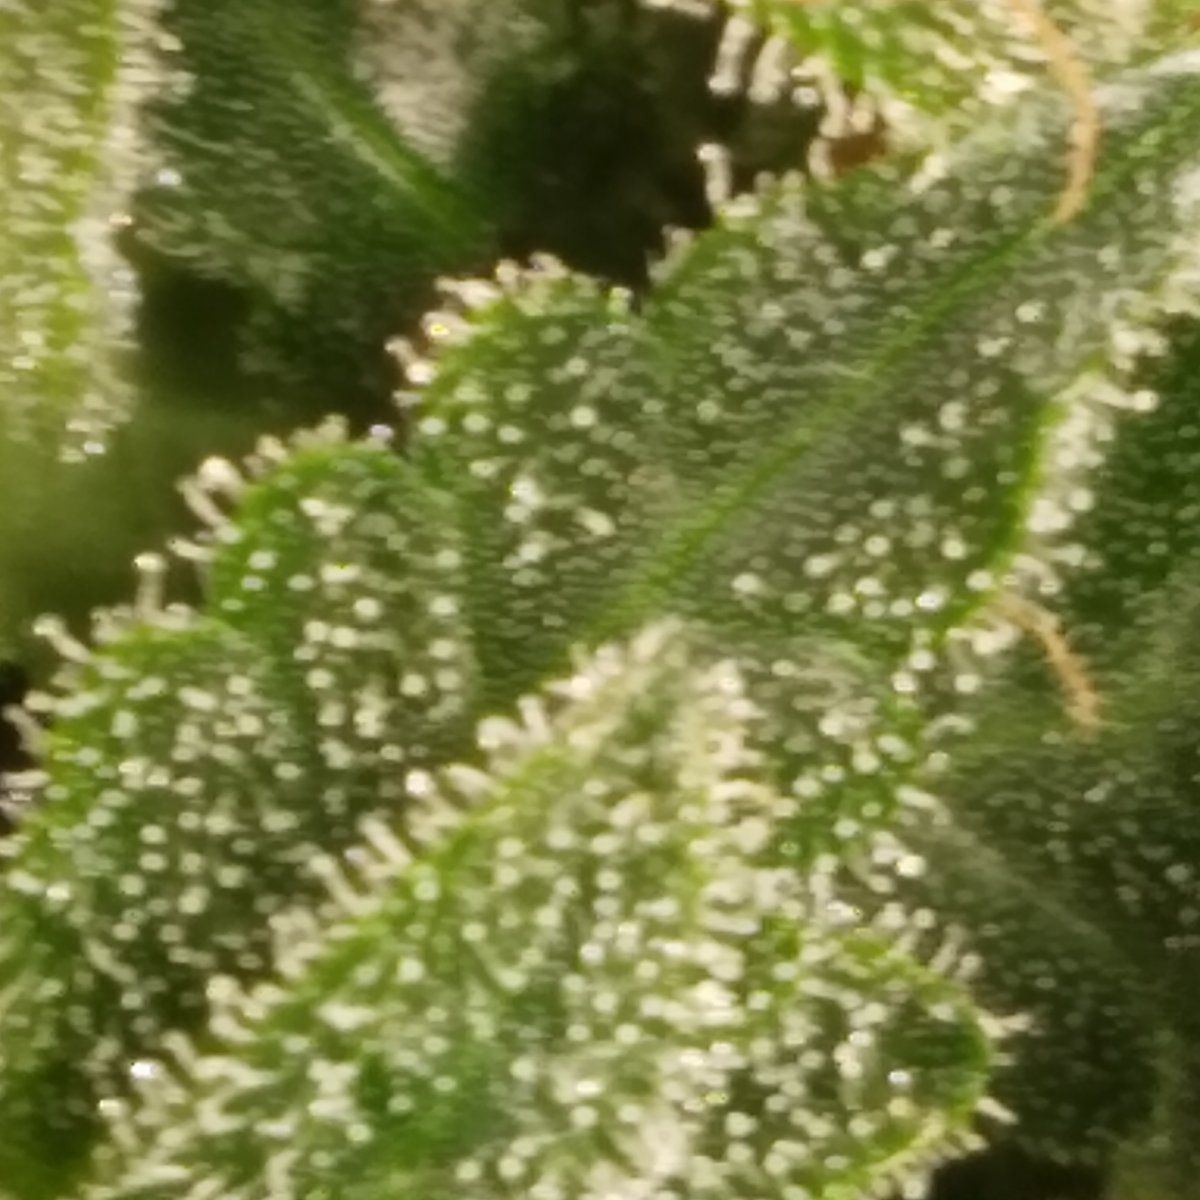 First time growing does this 3